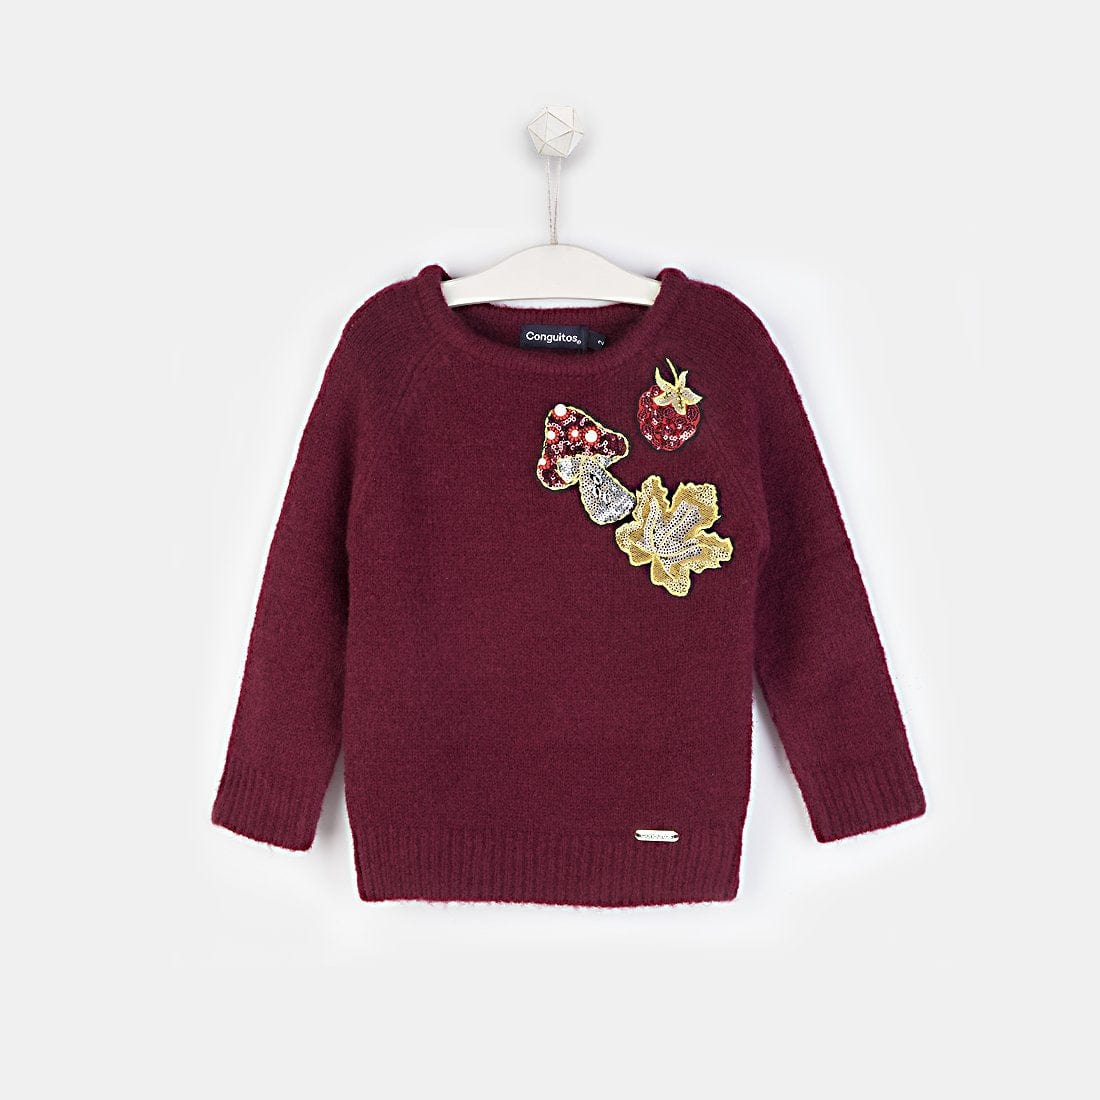 CONGUITOS TEXTIL Clothing Girls Patches Wine Sweater